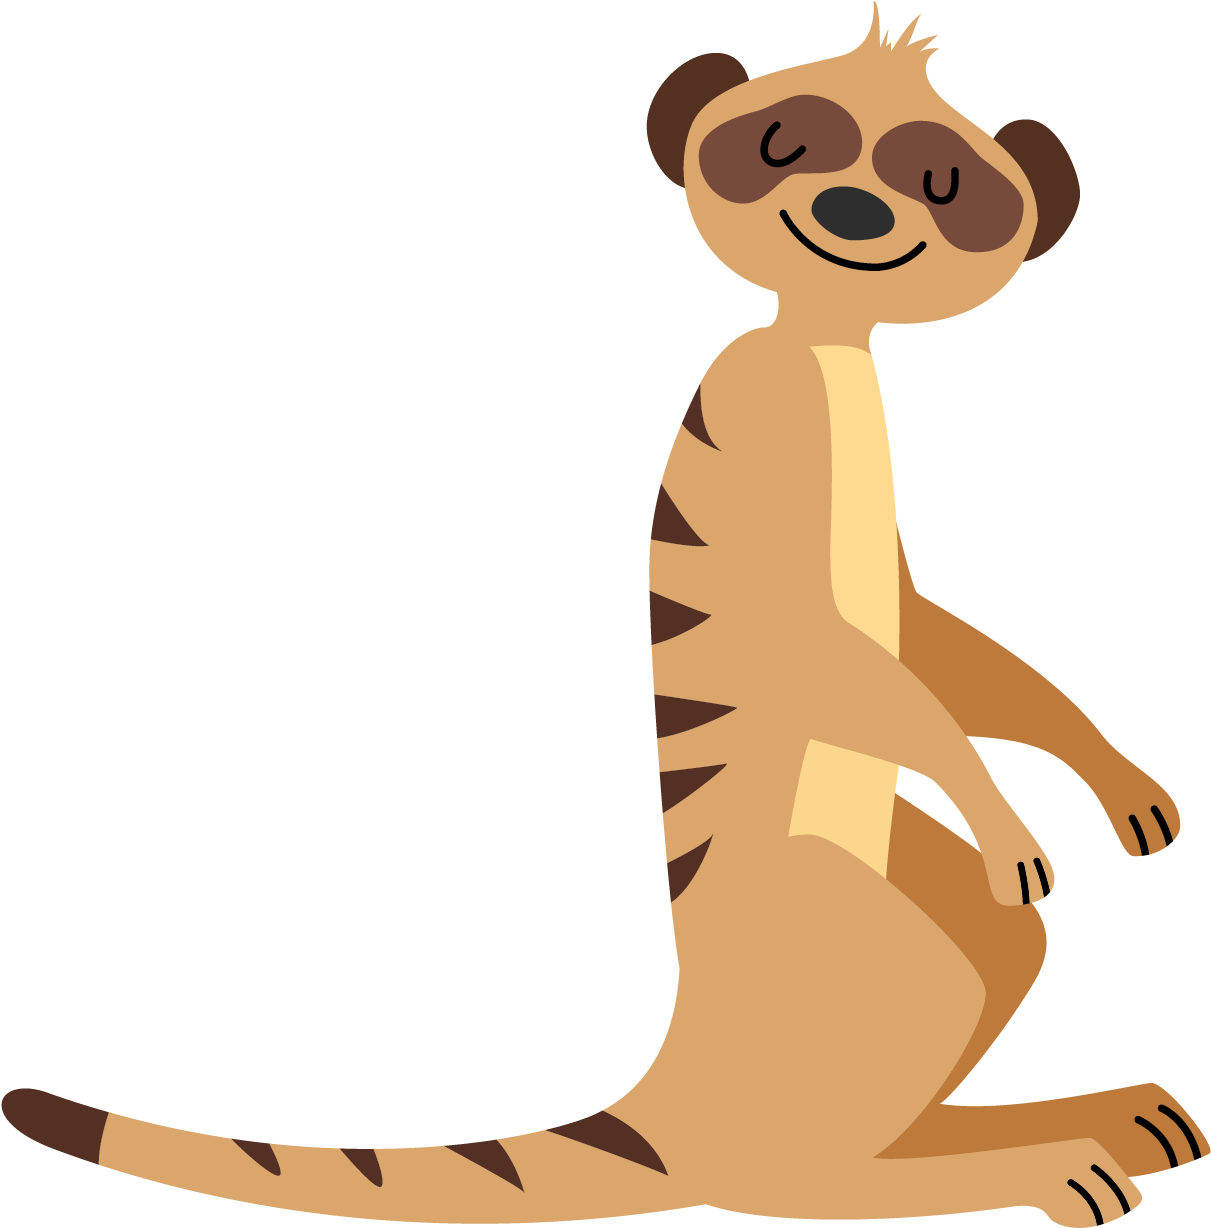 Animated Meerkat Sitting Graphic PNG